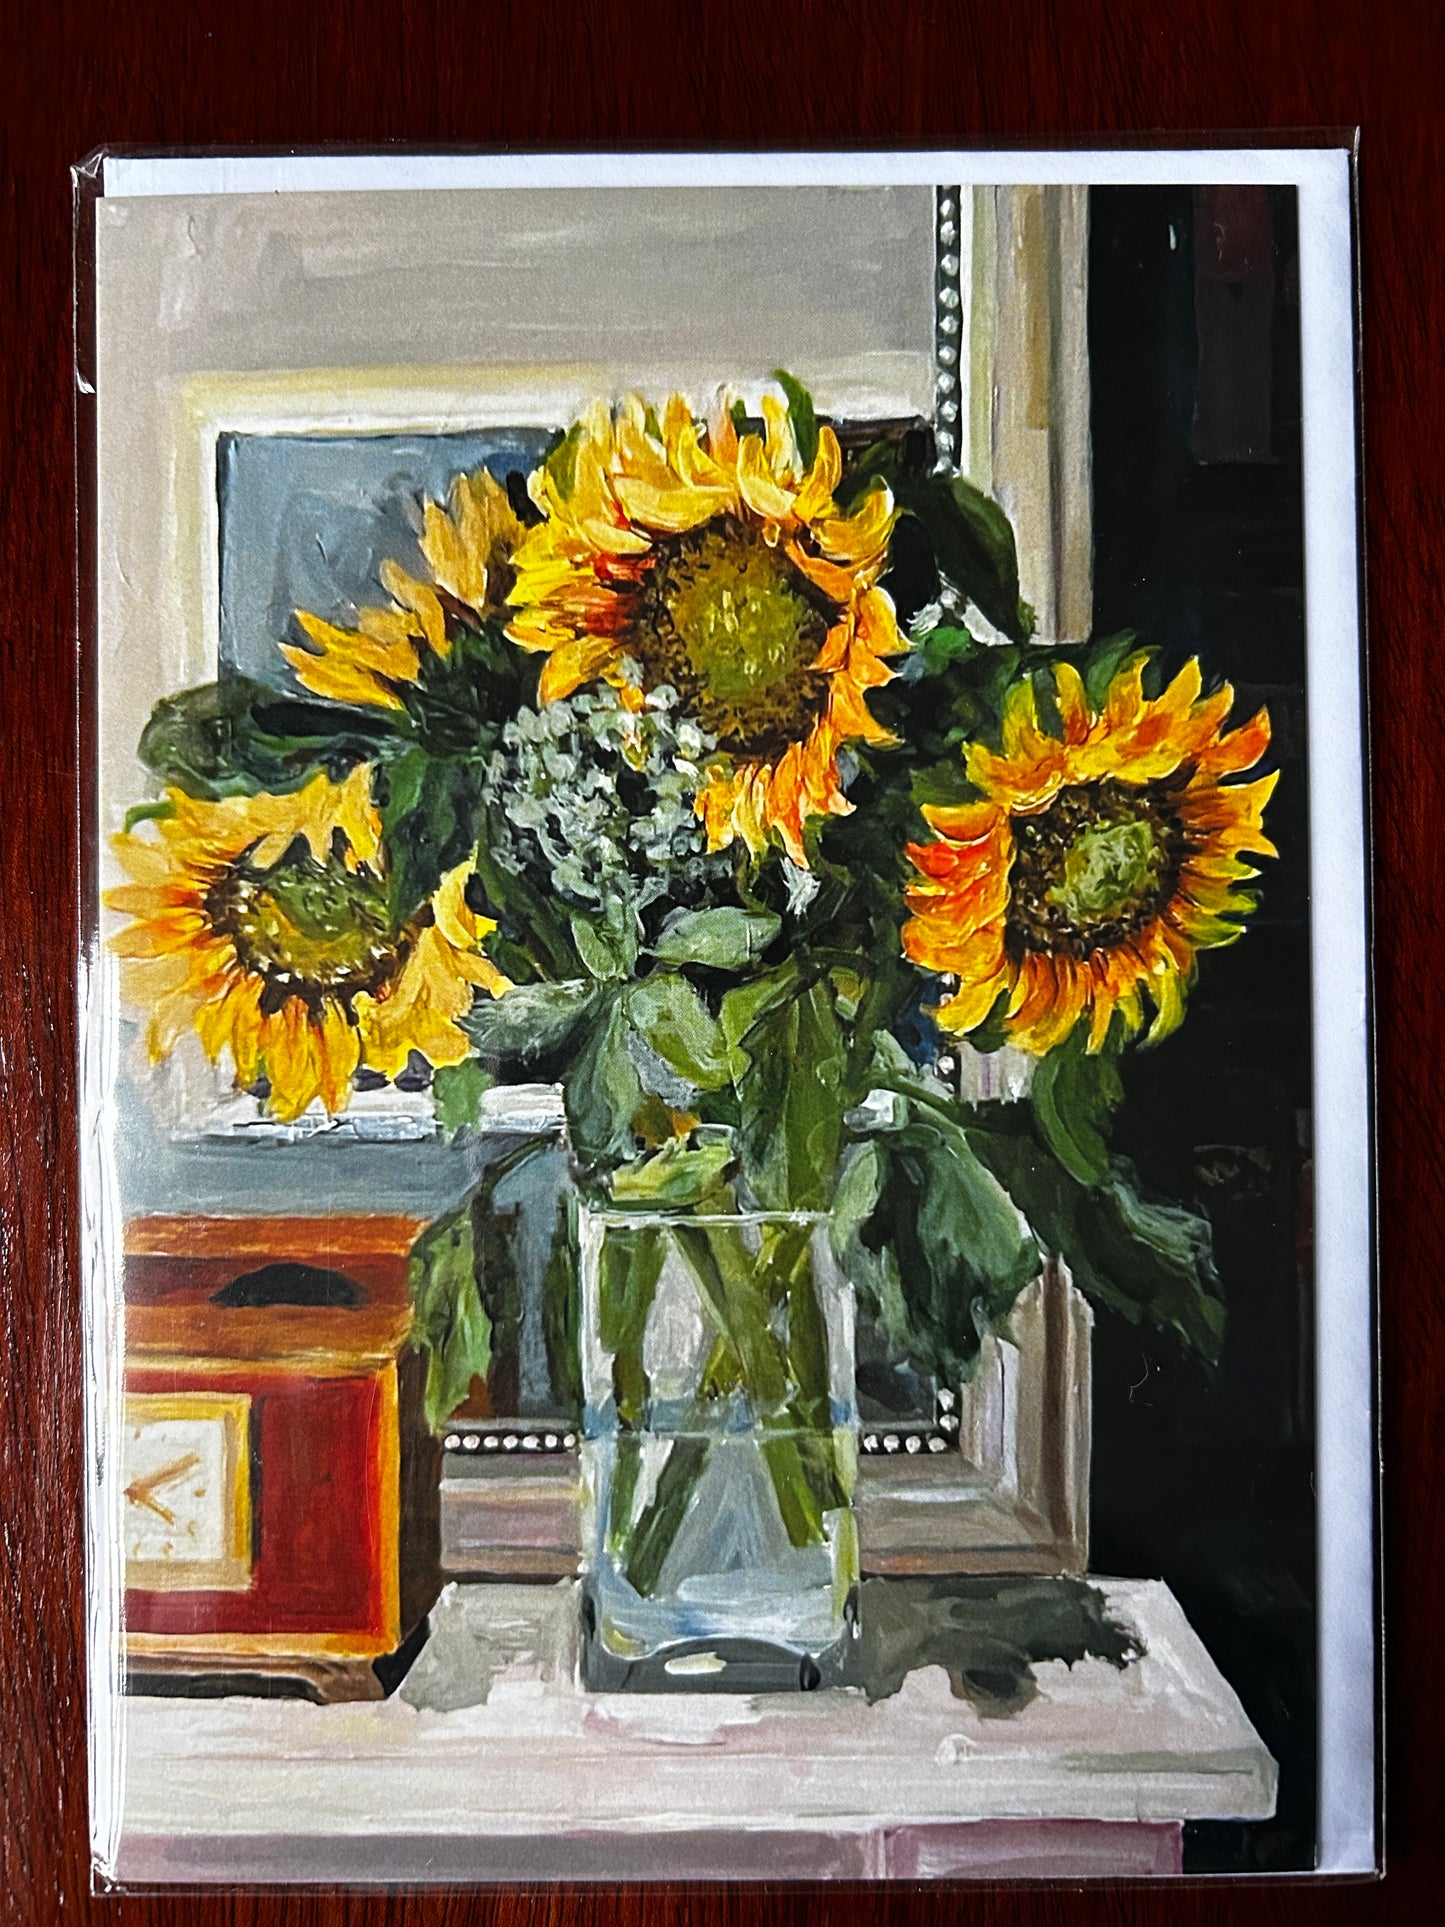 Still Life with Sunflowers - Greetings Card